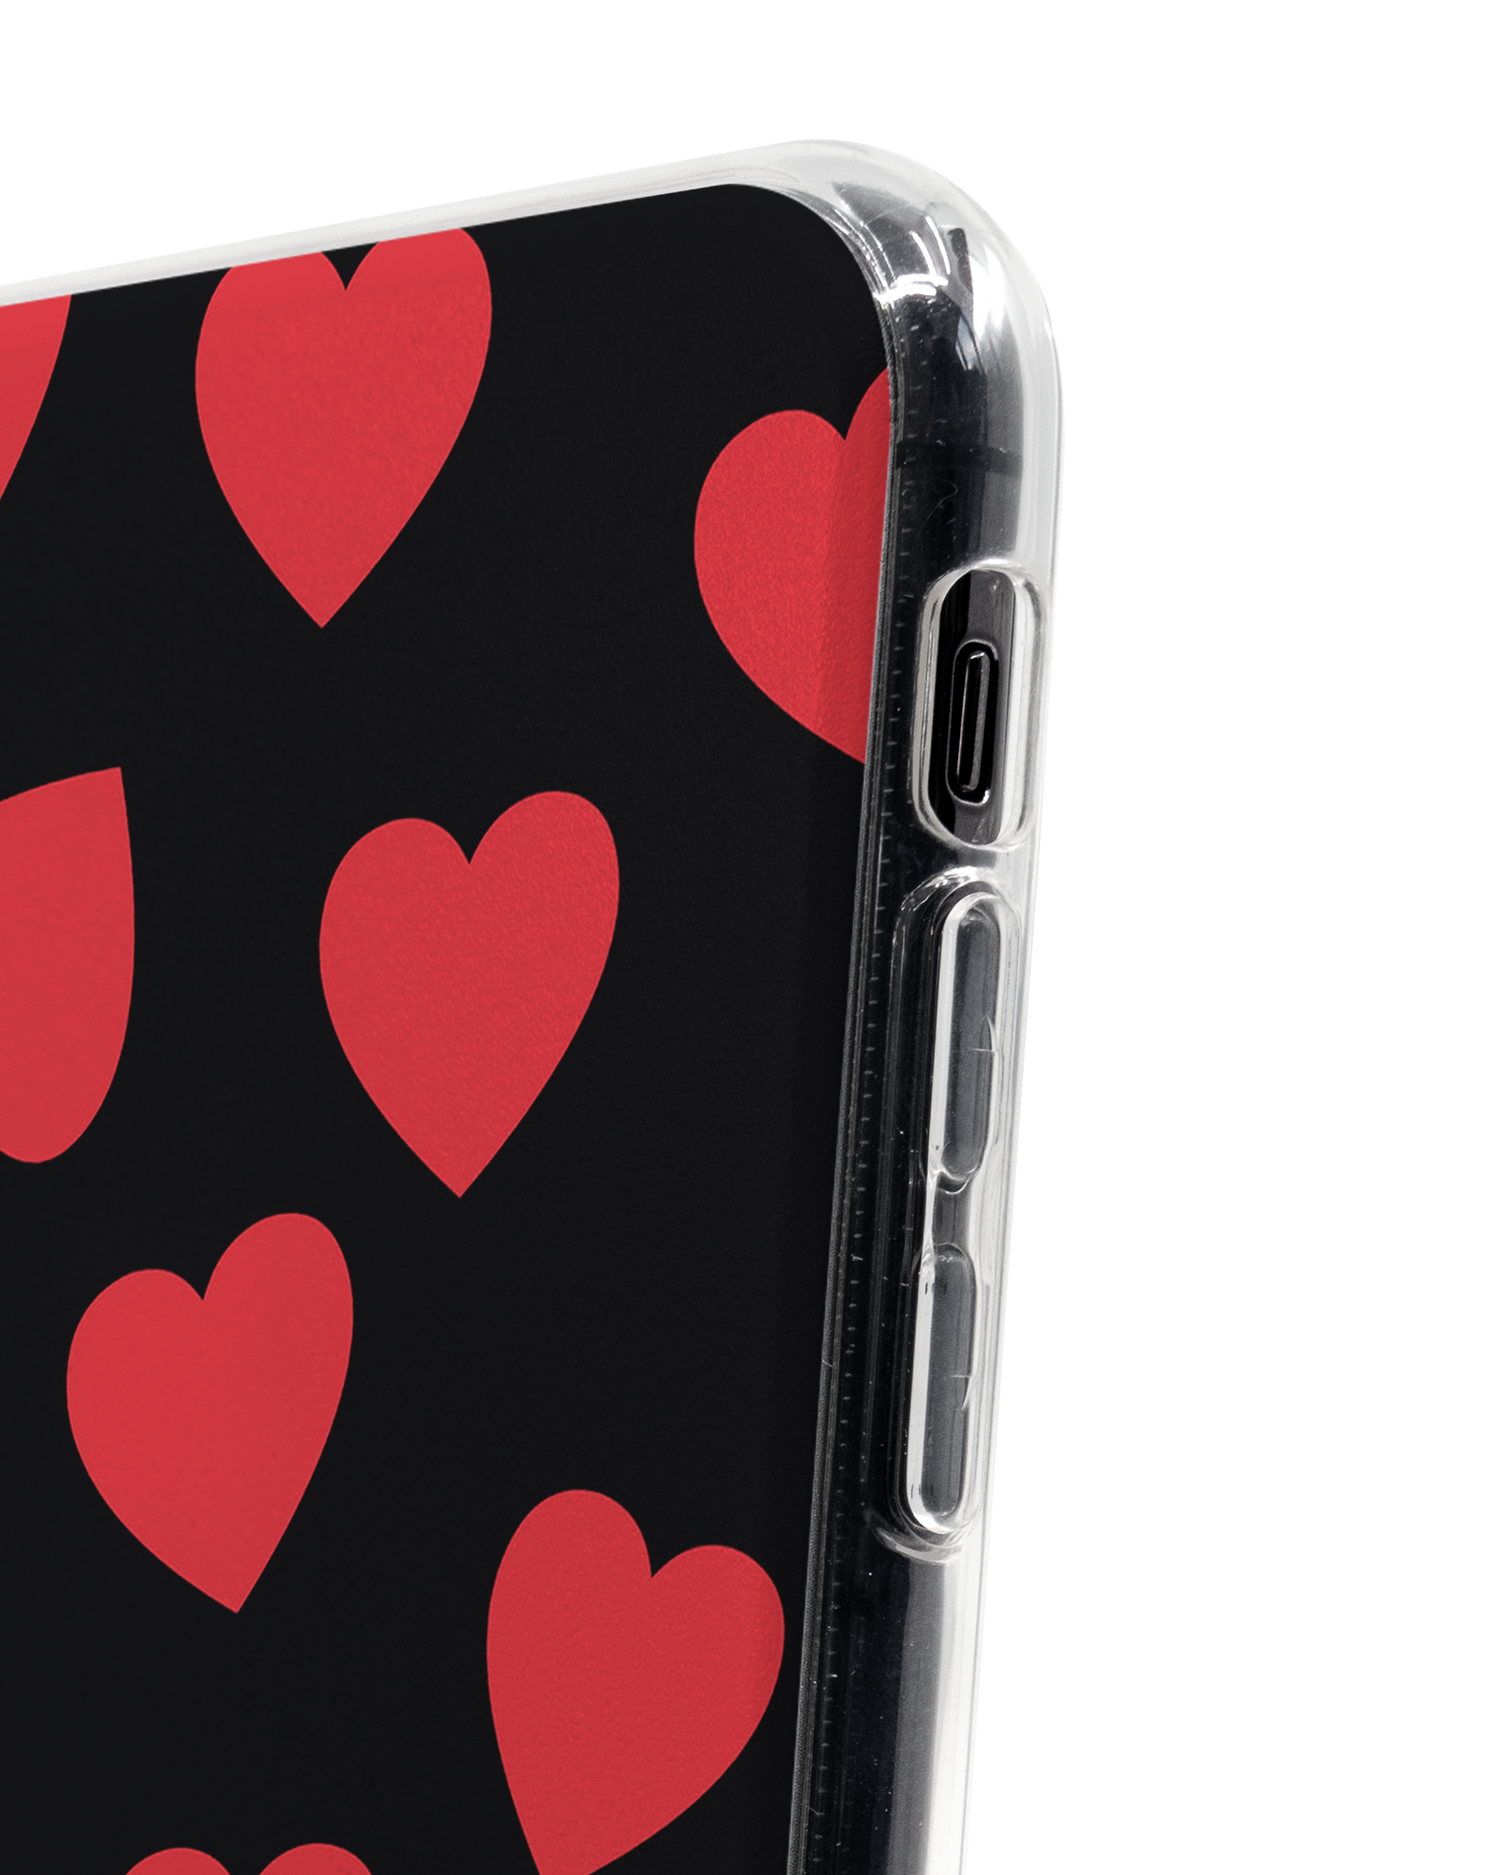 Repeating Hearts Silicone Phone Case for Apple iPhone XS Max with transparent sides